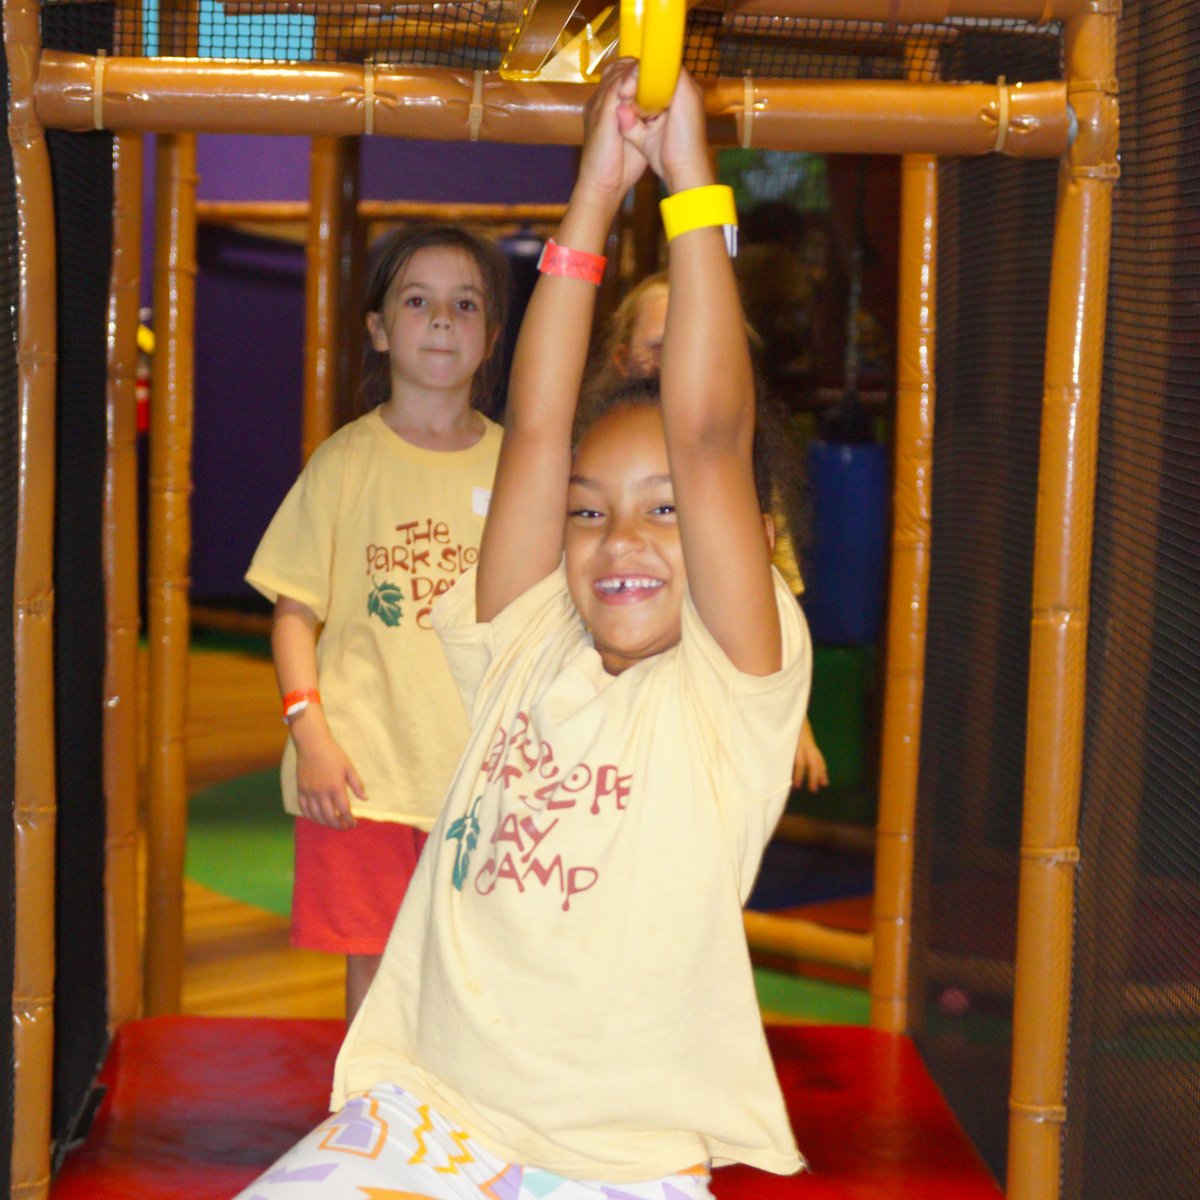 We are getting ready to swing back to Billy Beez! Just 58 days till we're buzzing like bees!🐝
#ParkSlopeDayCamp #PSDCSummer #VirtualInfoSession #EnrollNow #BrooklynKids #ParkSlopeDayCamp #ThingsToDo #ChildCare #NYCKids #ParkSlope #DayCamp #Brooklyn #ParkSlopeKids #NYCDOE